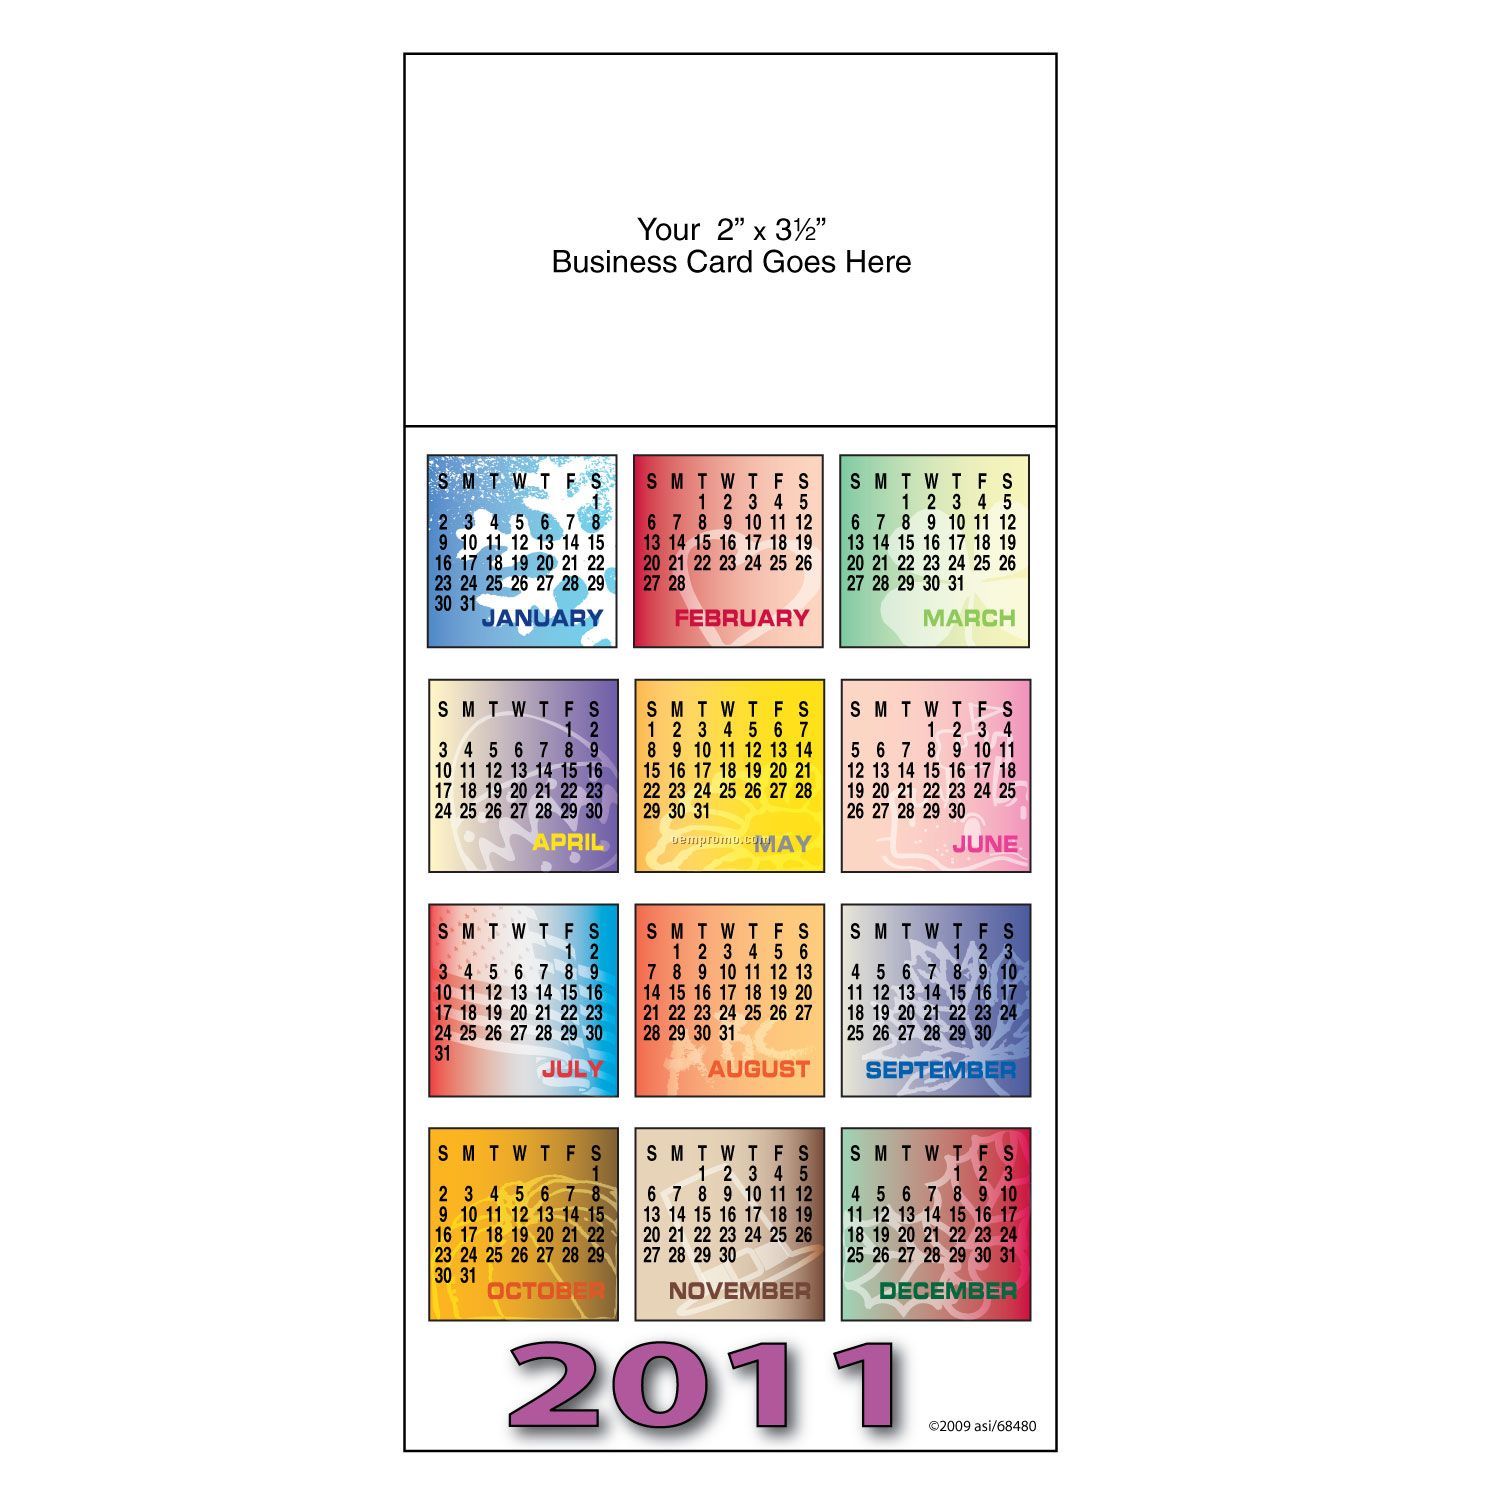 Self-adhesive Add-on Magnet + Info Card "Holiday Calendar"